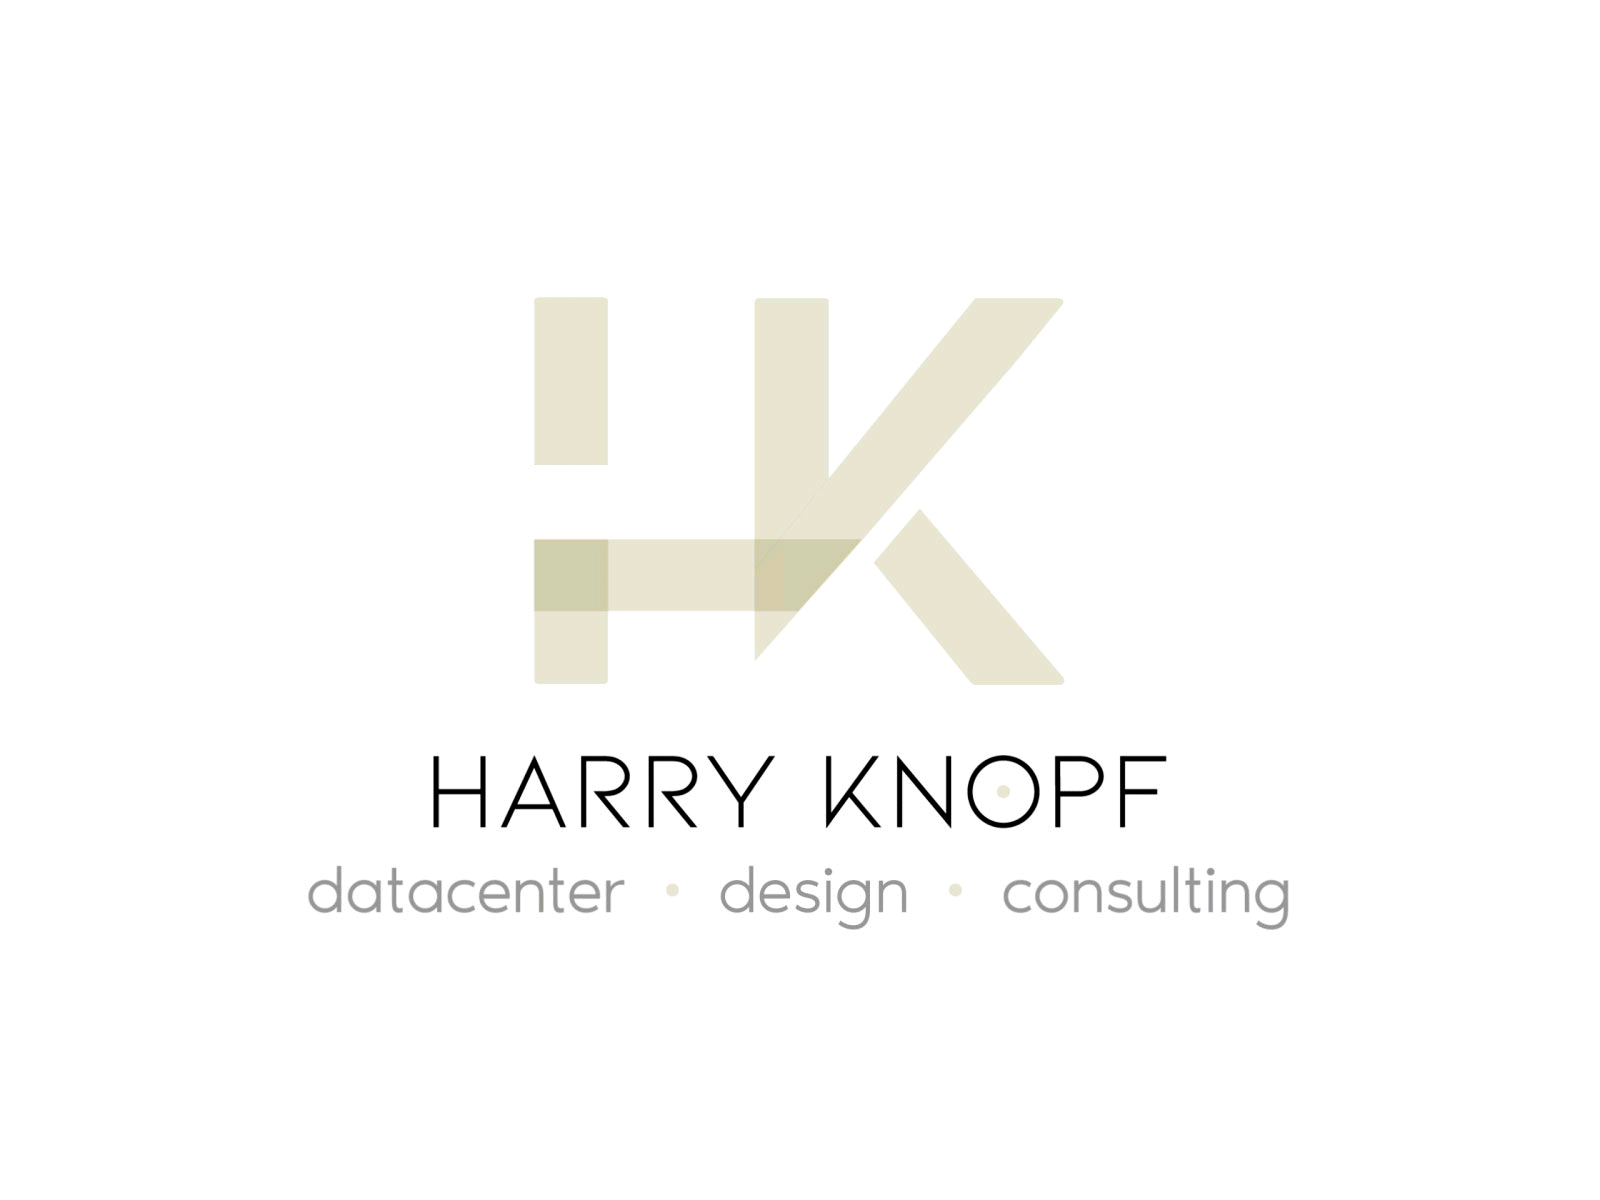 Harry Knopf -Logo Animation after effects business animation consultant consulting consulting logo dynamic fast harry knopf logo logo animation logoanimation text animation text logo